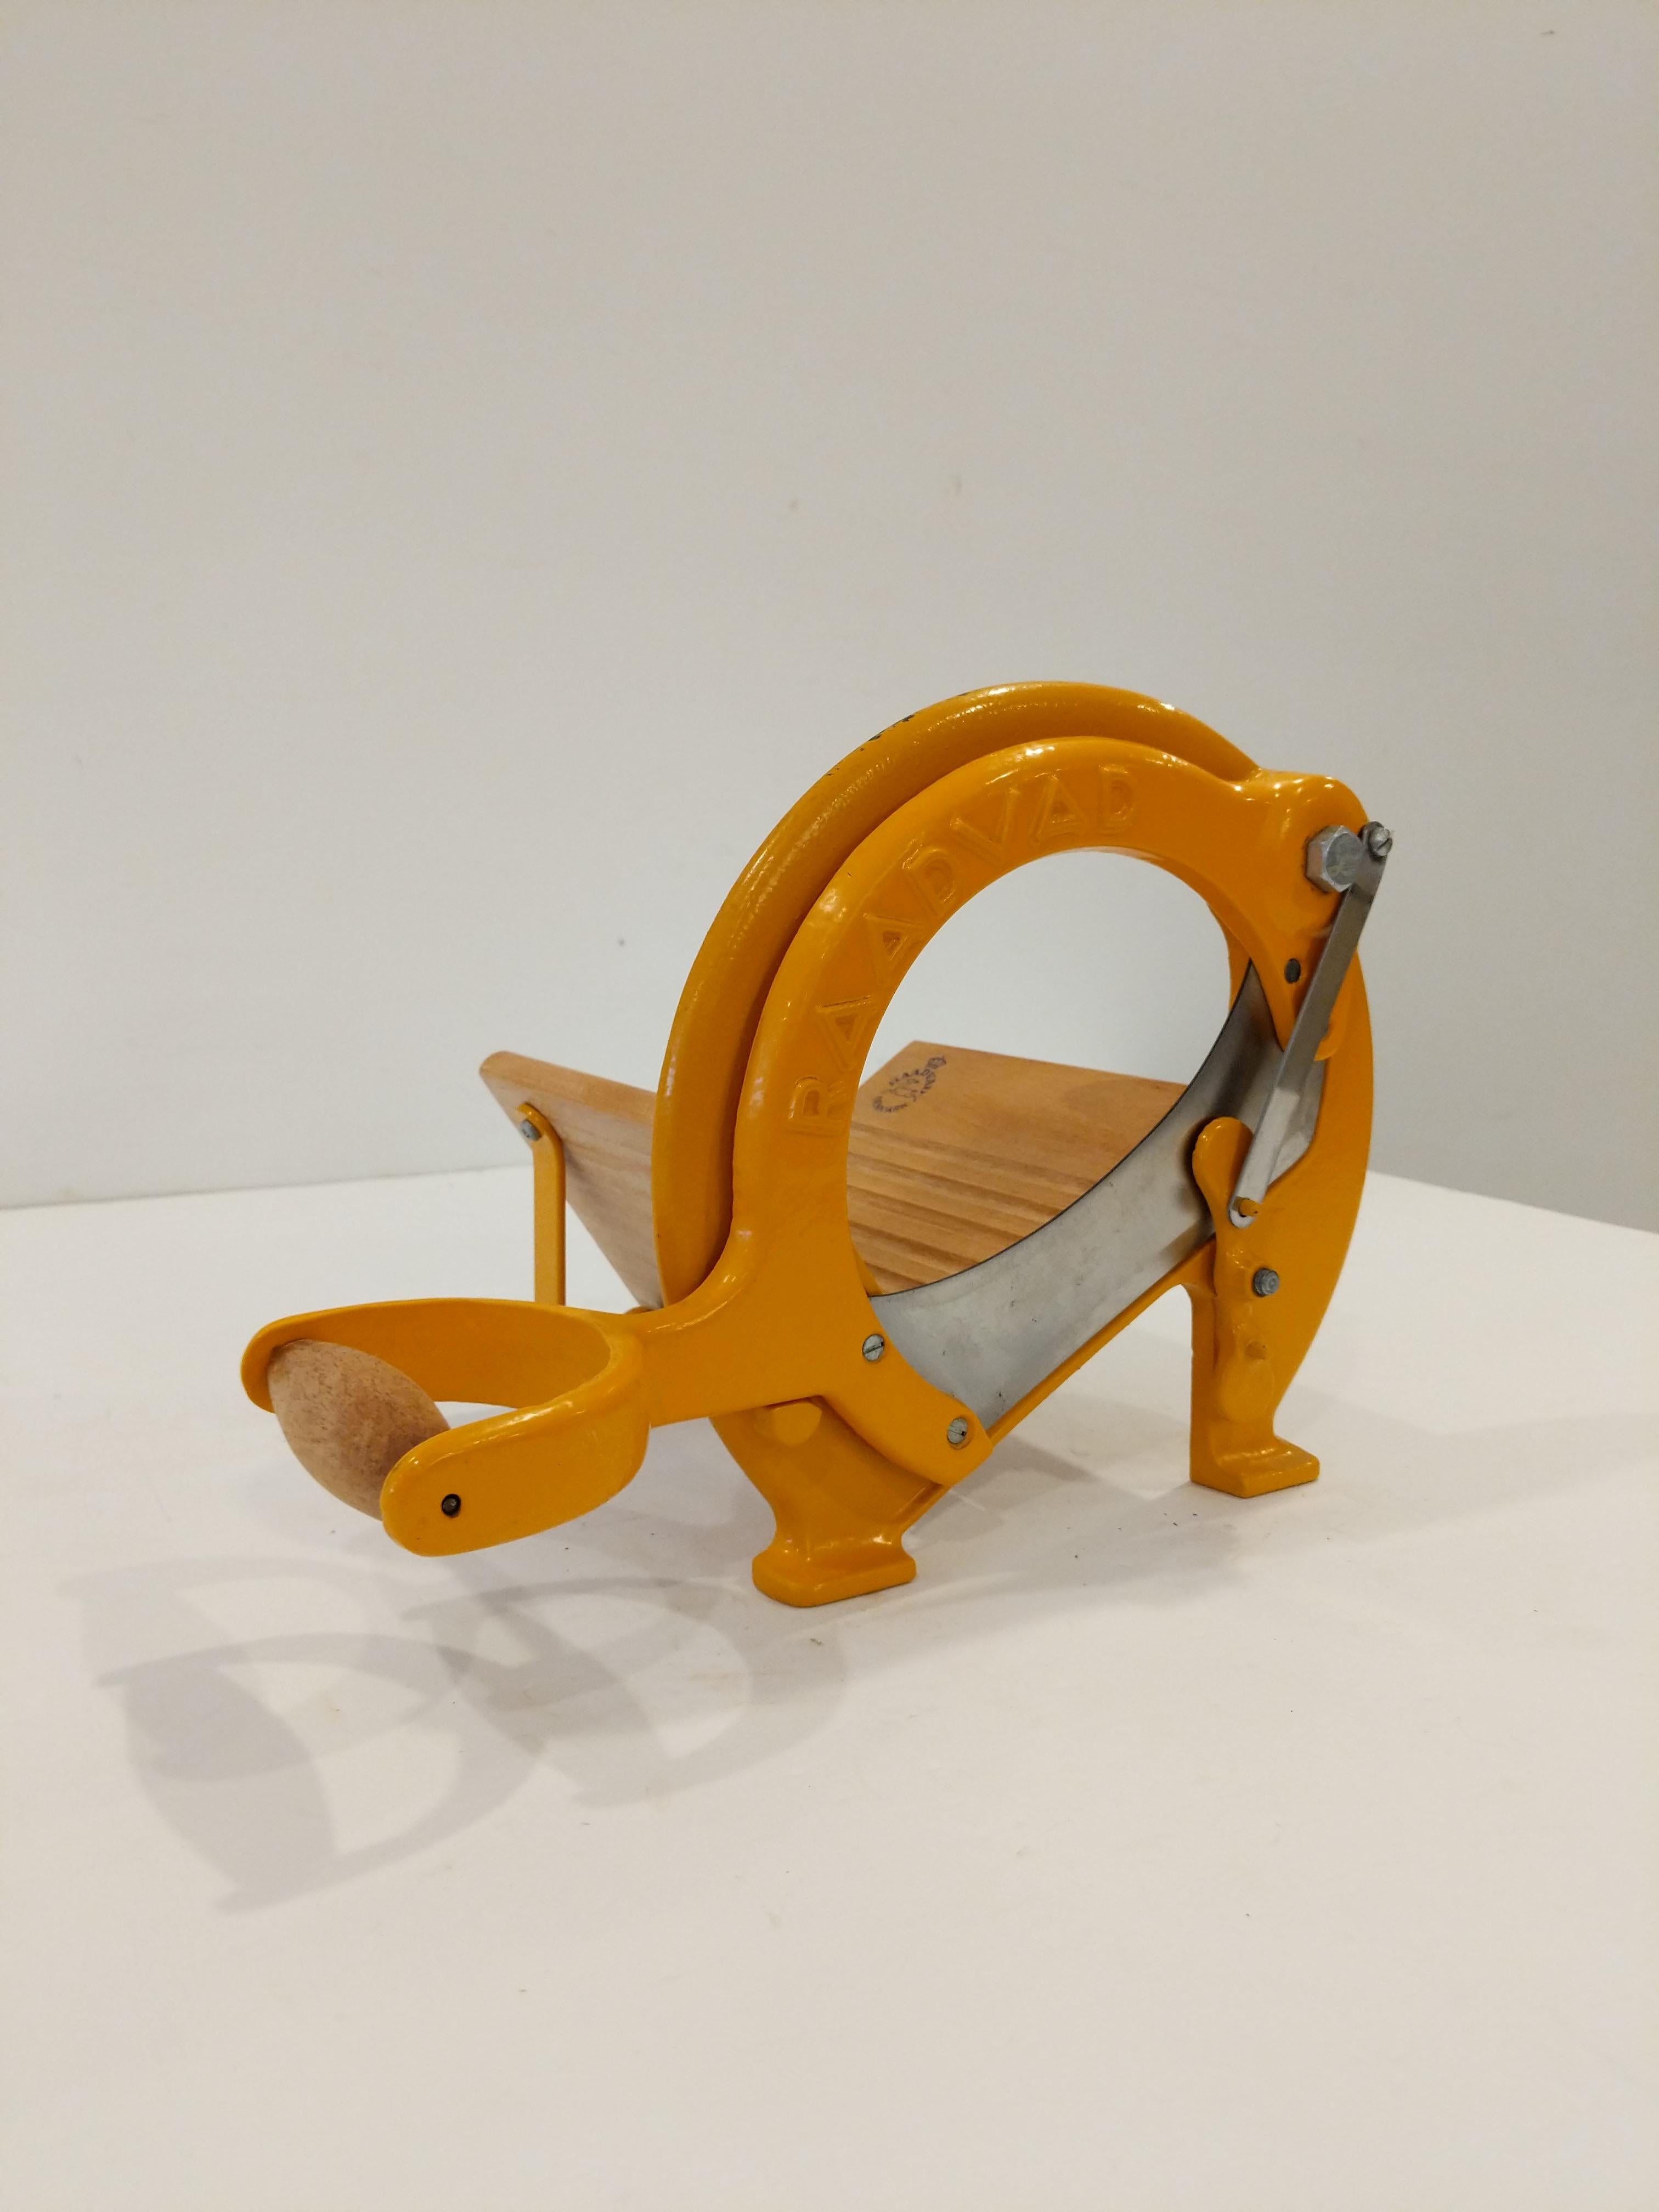 Authentic vintage Danish bread slicer / guillotine in yellow-orange.

Model 294 by Raadvad.

This slicer is in good condition overall and expectedly shows its age a bit.

Dimensions:
13.5” Long including handle
9.5” Tall
8” Wide

Ref: RV27-057